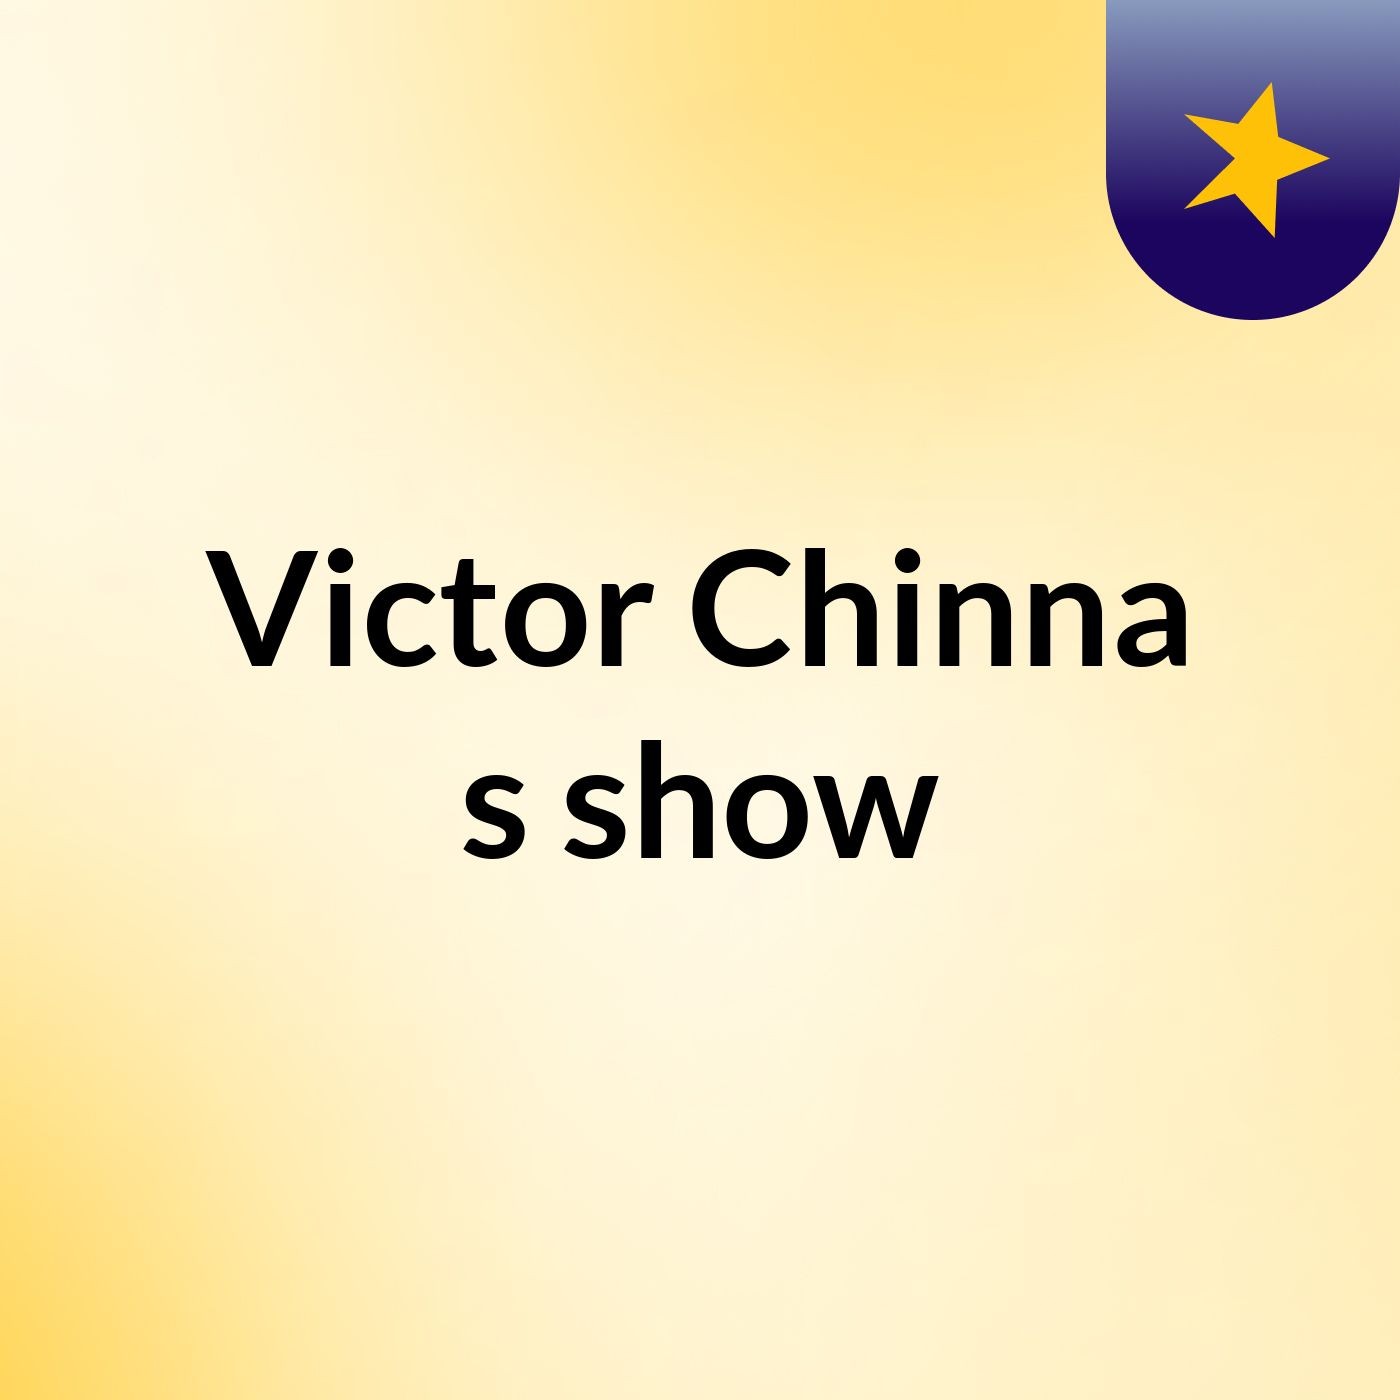 Victor Chinna's show